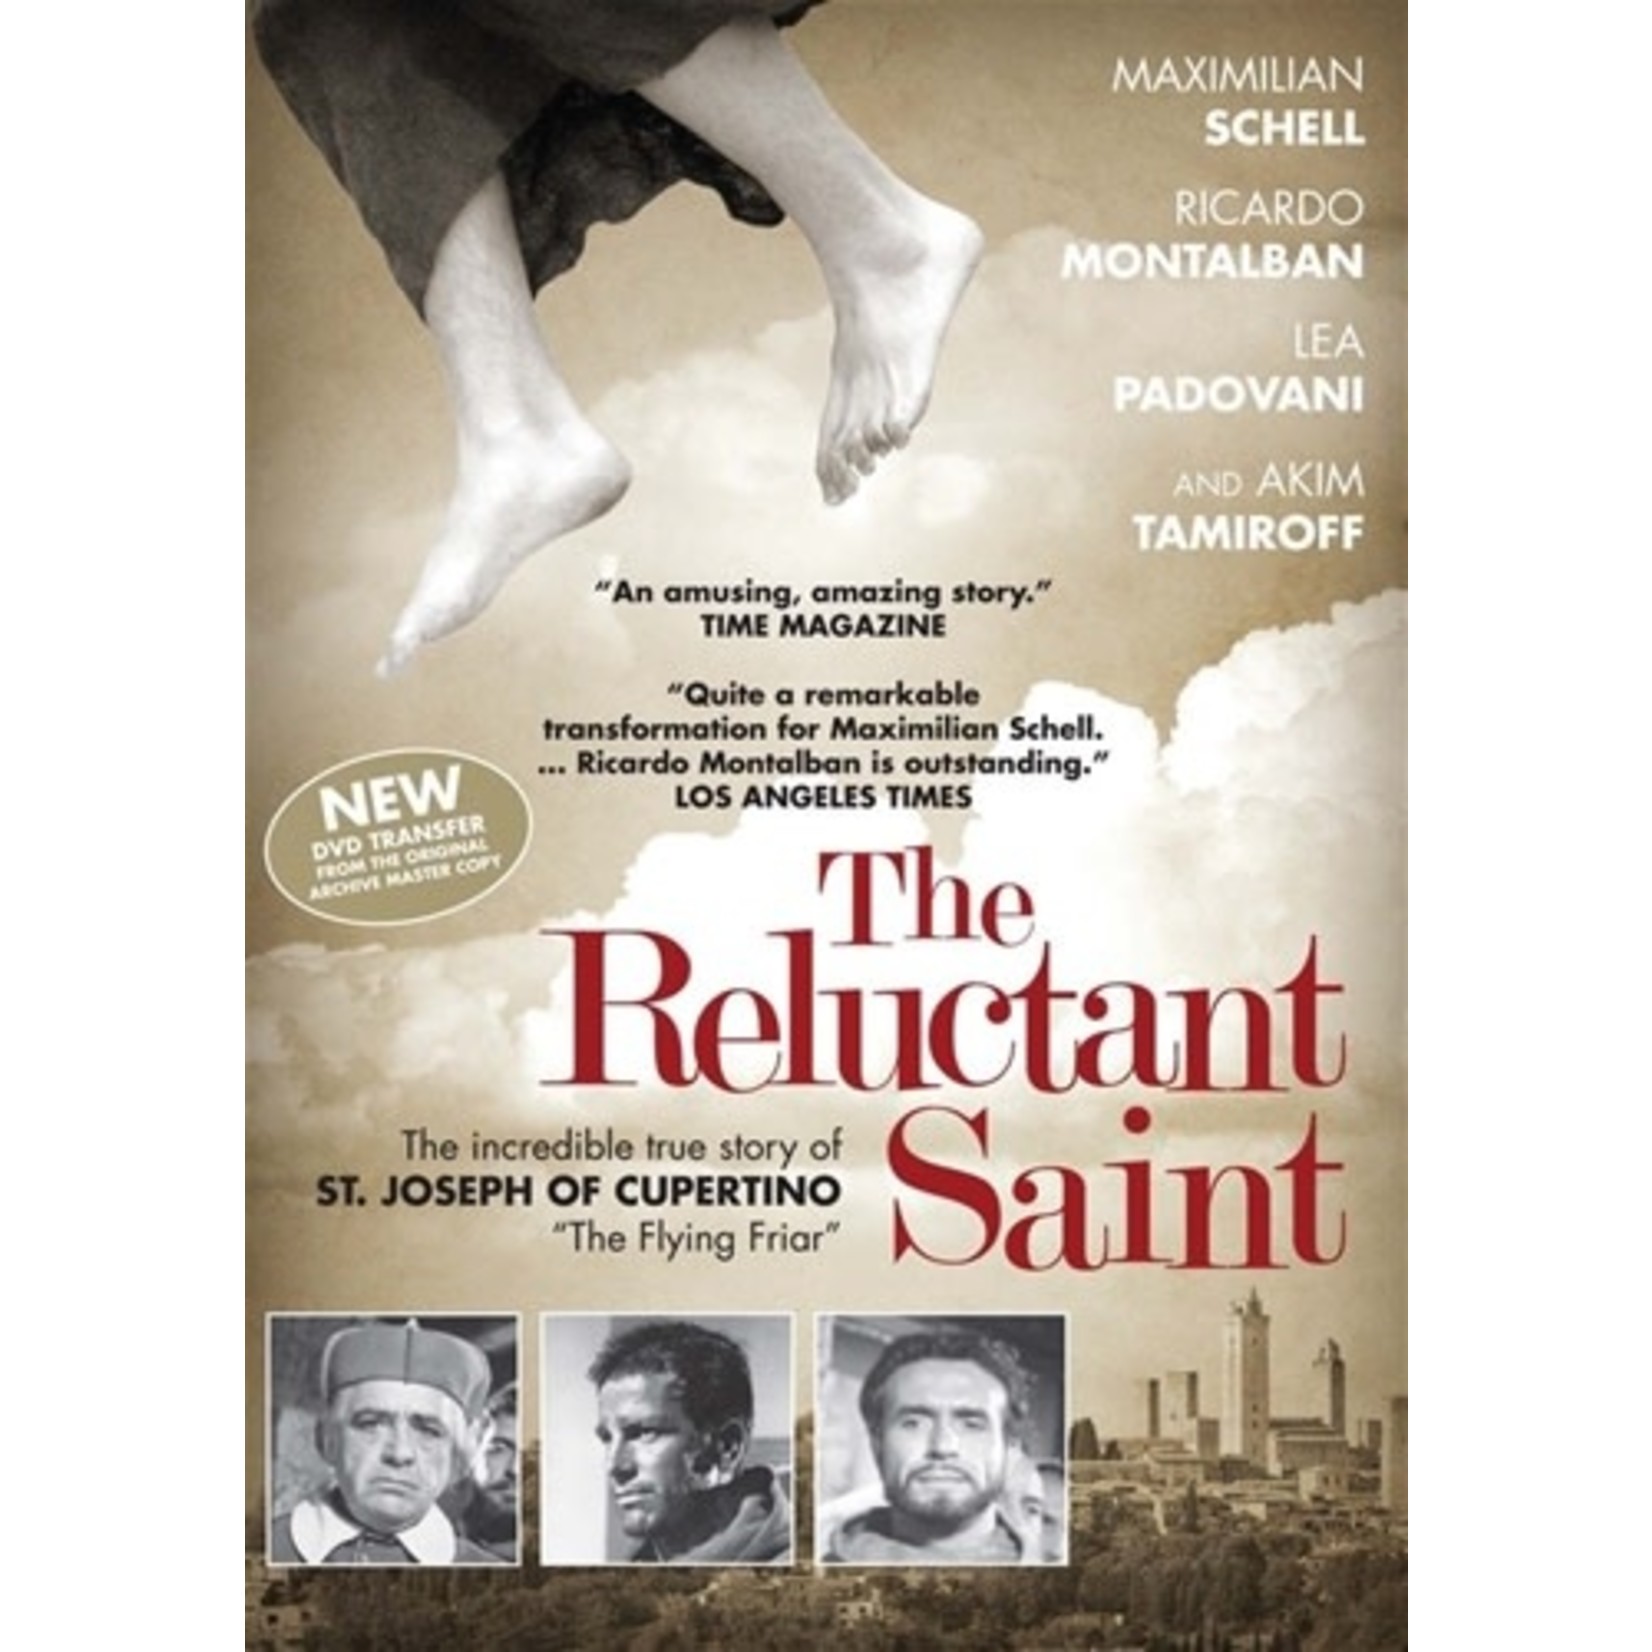 The Reluctant Saint (St Joseph of Cupertino) DVD